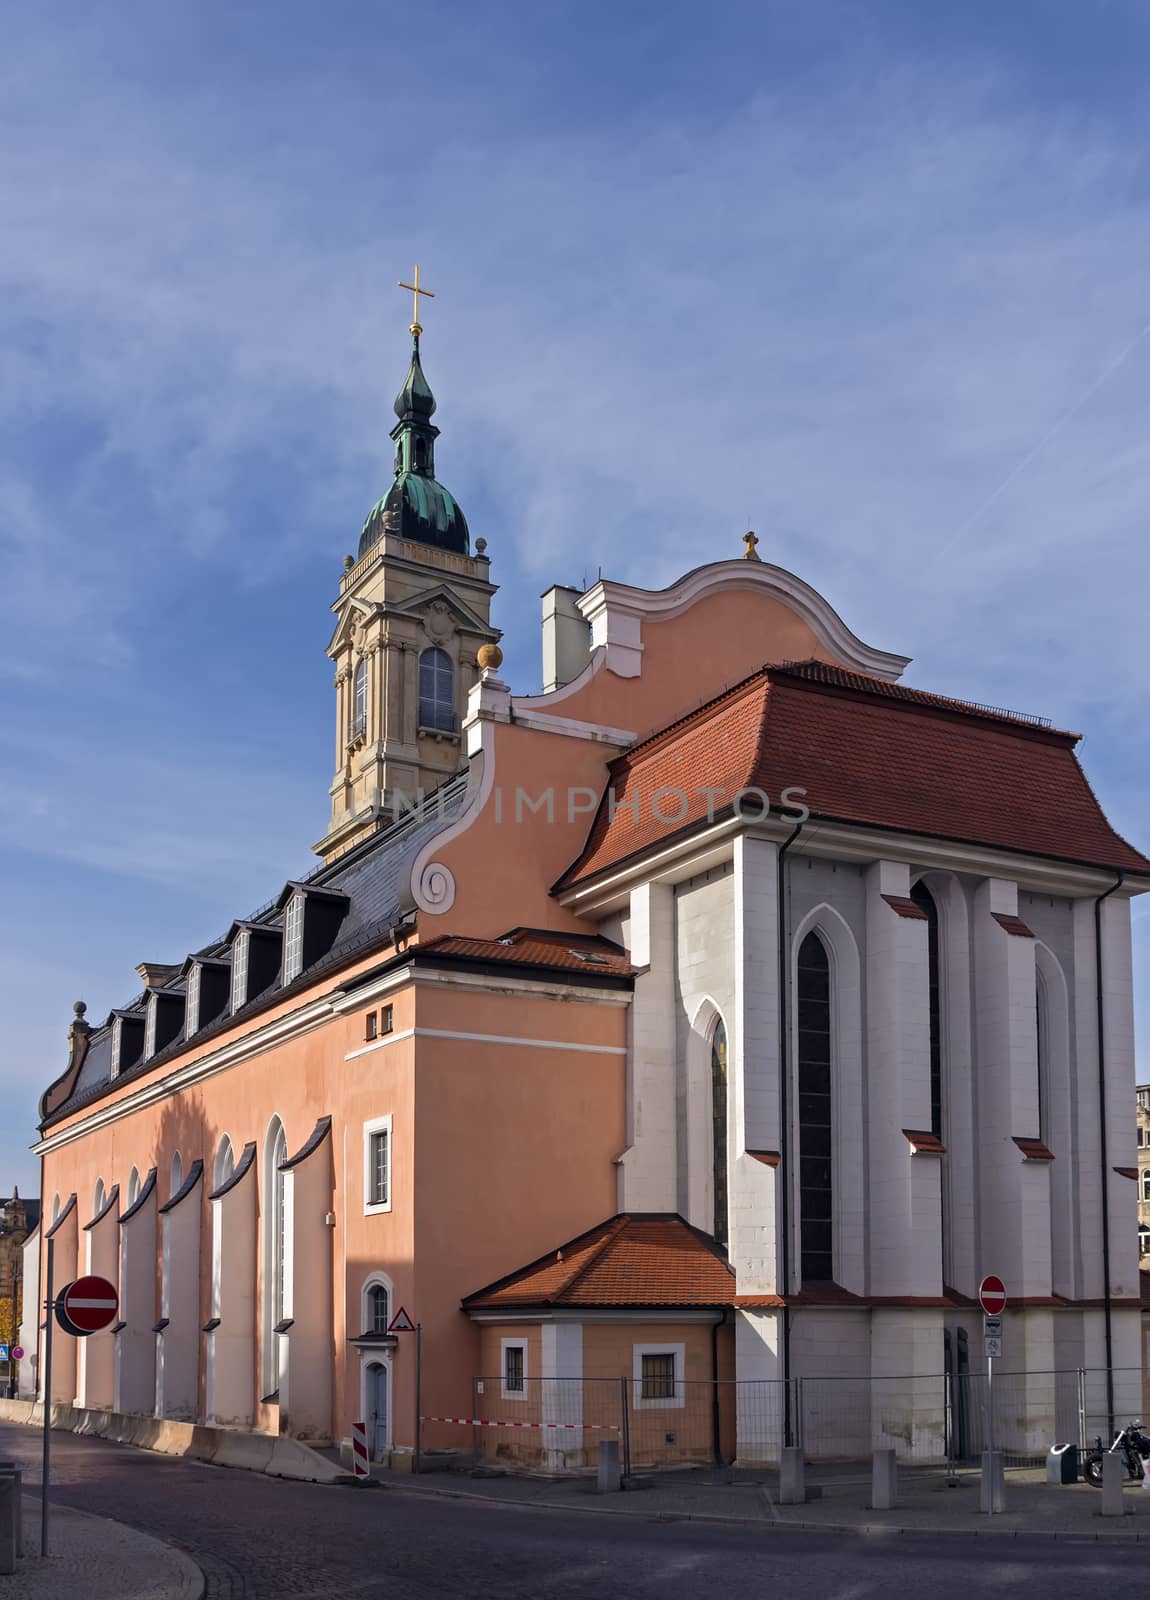 The church at the market square, was first built in the 12th century and later reconstructed in Baroque style